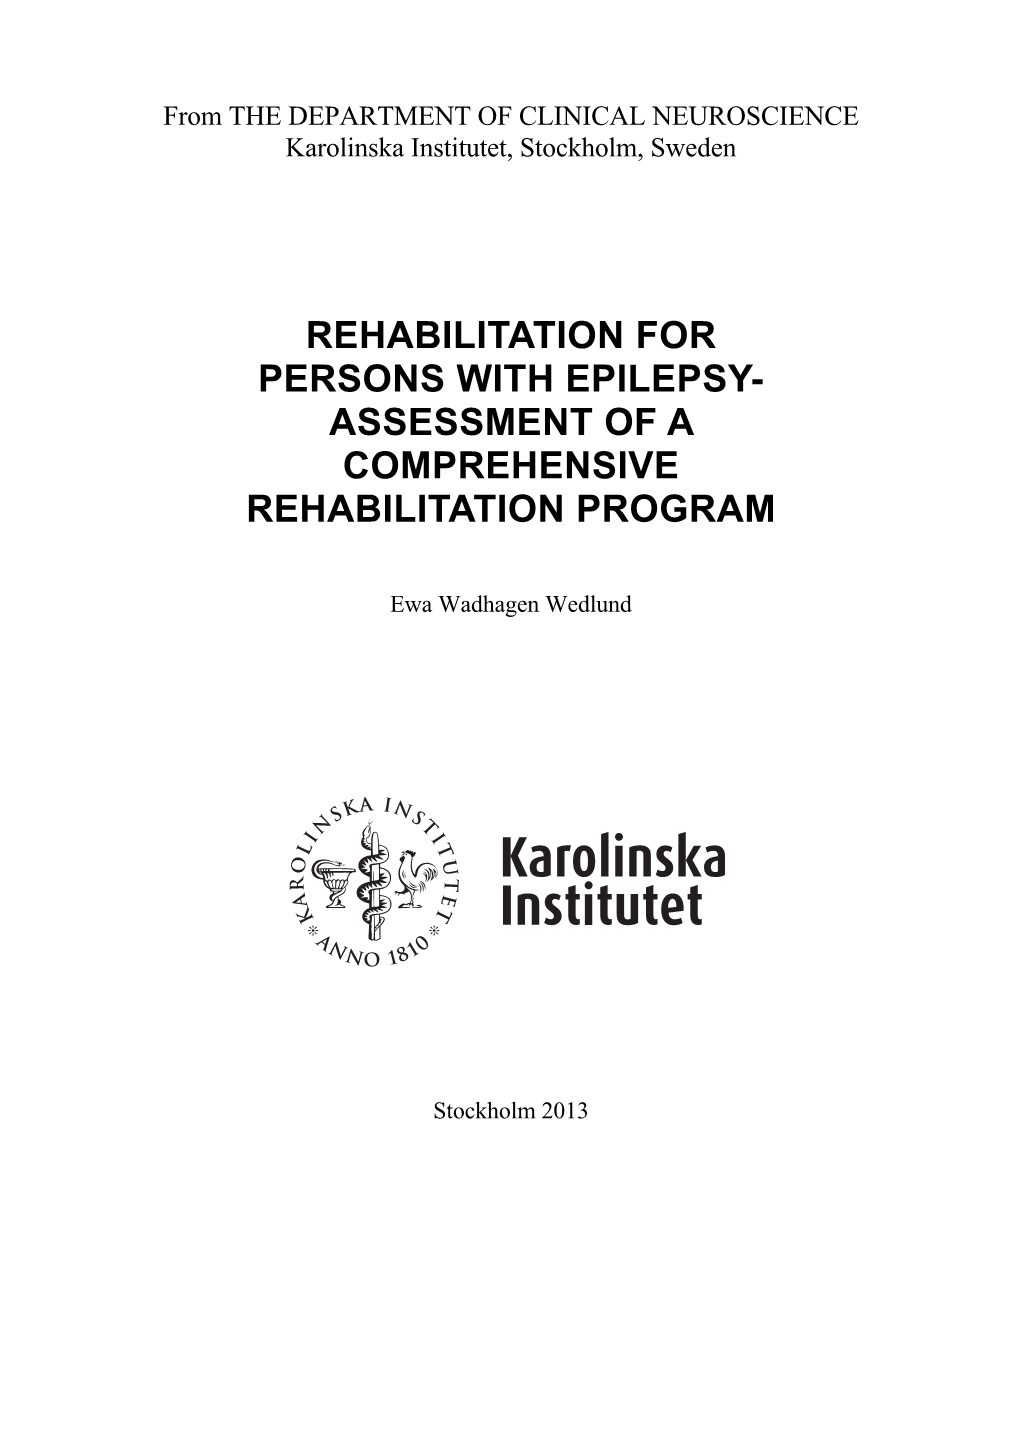 Rehabilitation for Persons with Epilepsy- Assessment of a Comprehensive Rehabilitation Program